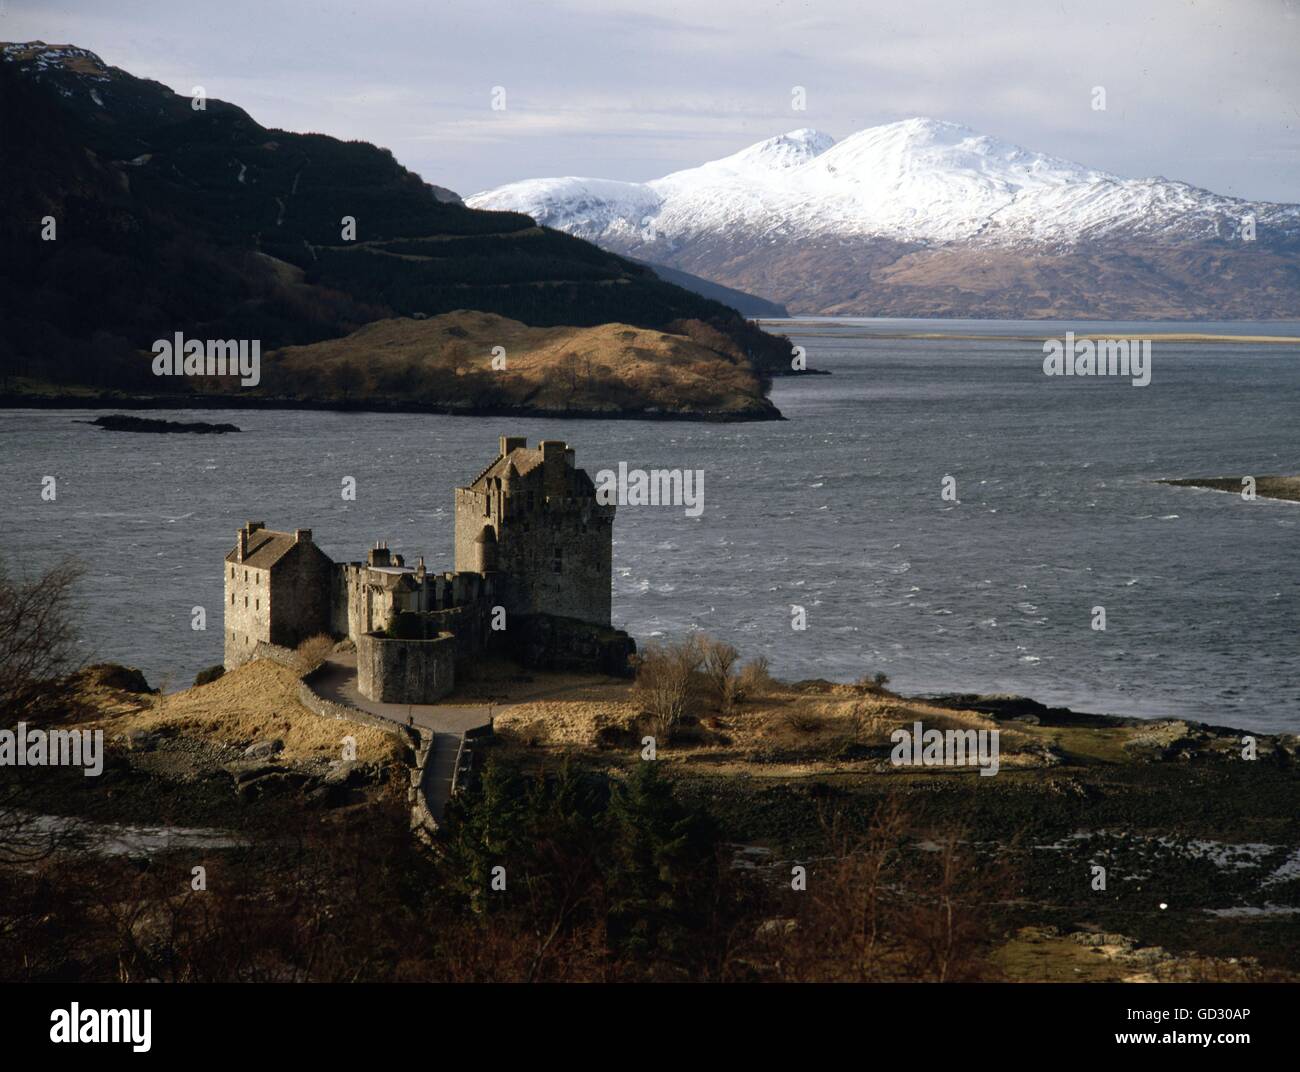 Scotland, Skye. Loch Alsh with Eilean Donan Castle. The snow-covered hills on Skye lie close to KyleRea. Circa 1982.    Scanned Stock Photo